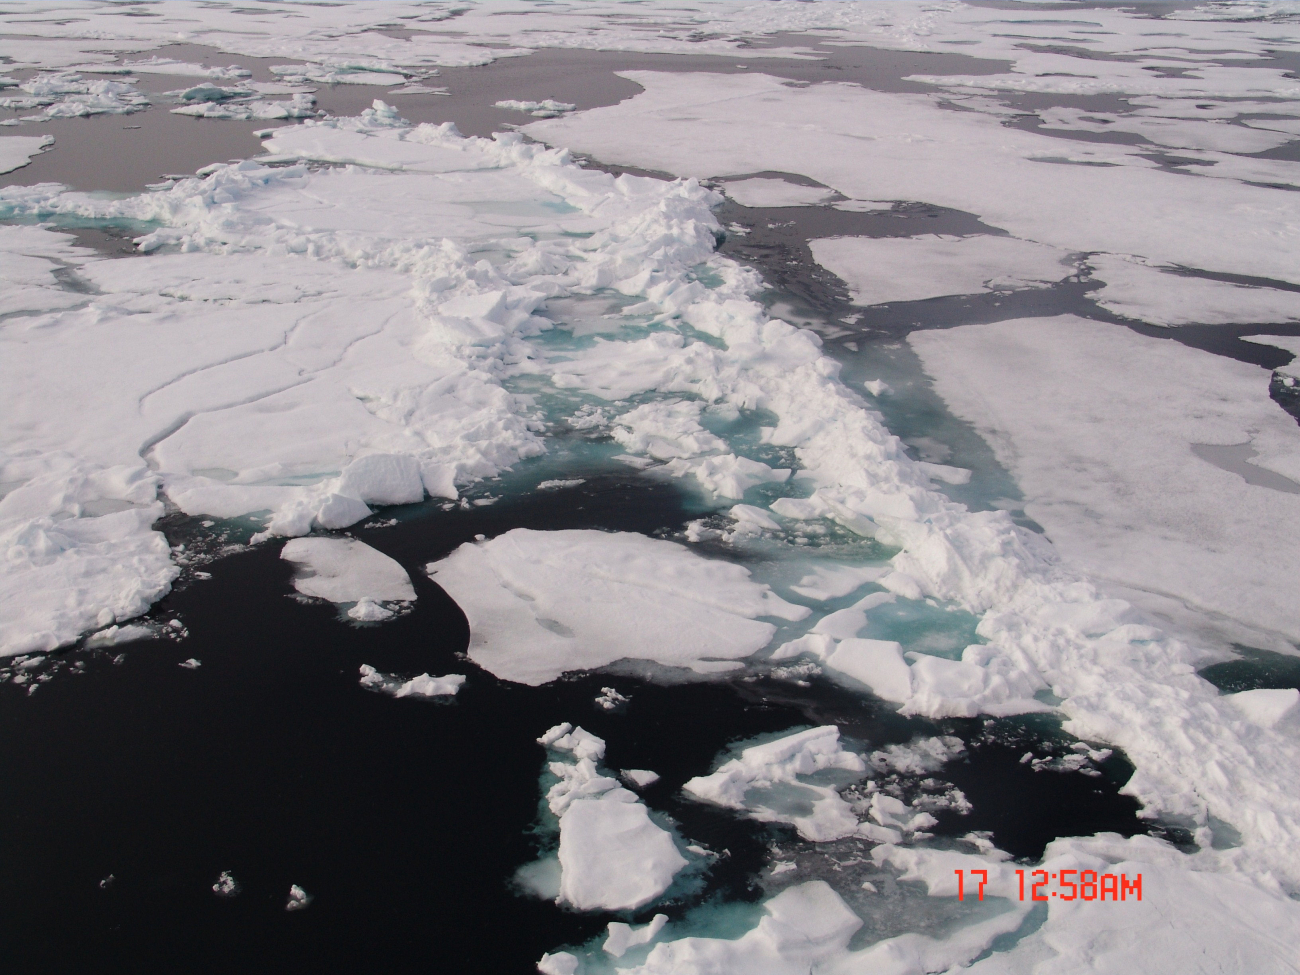 Ice floes with remains of ridge